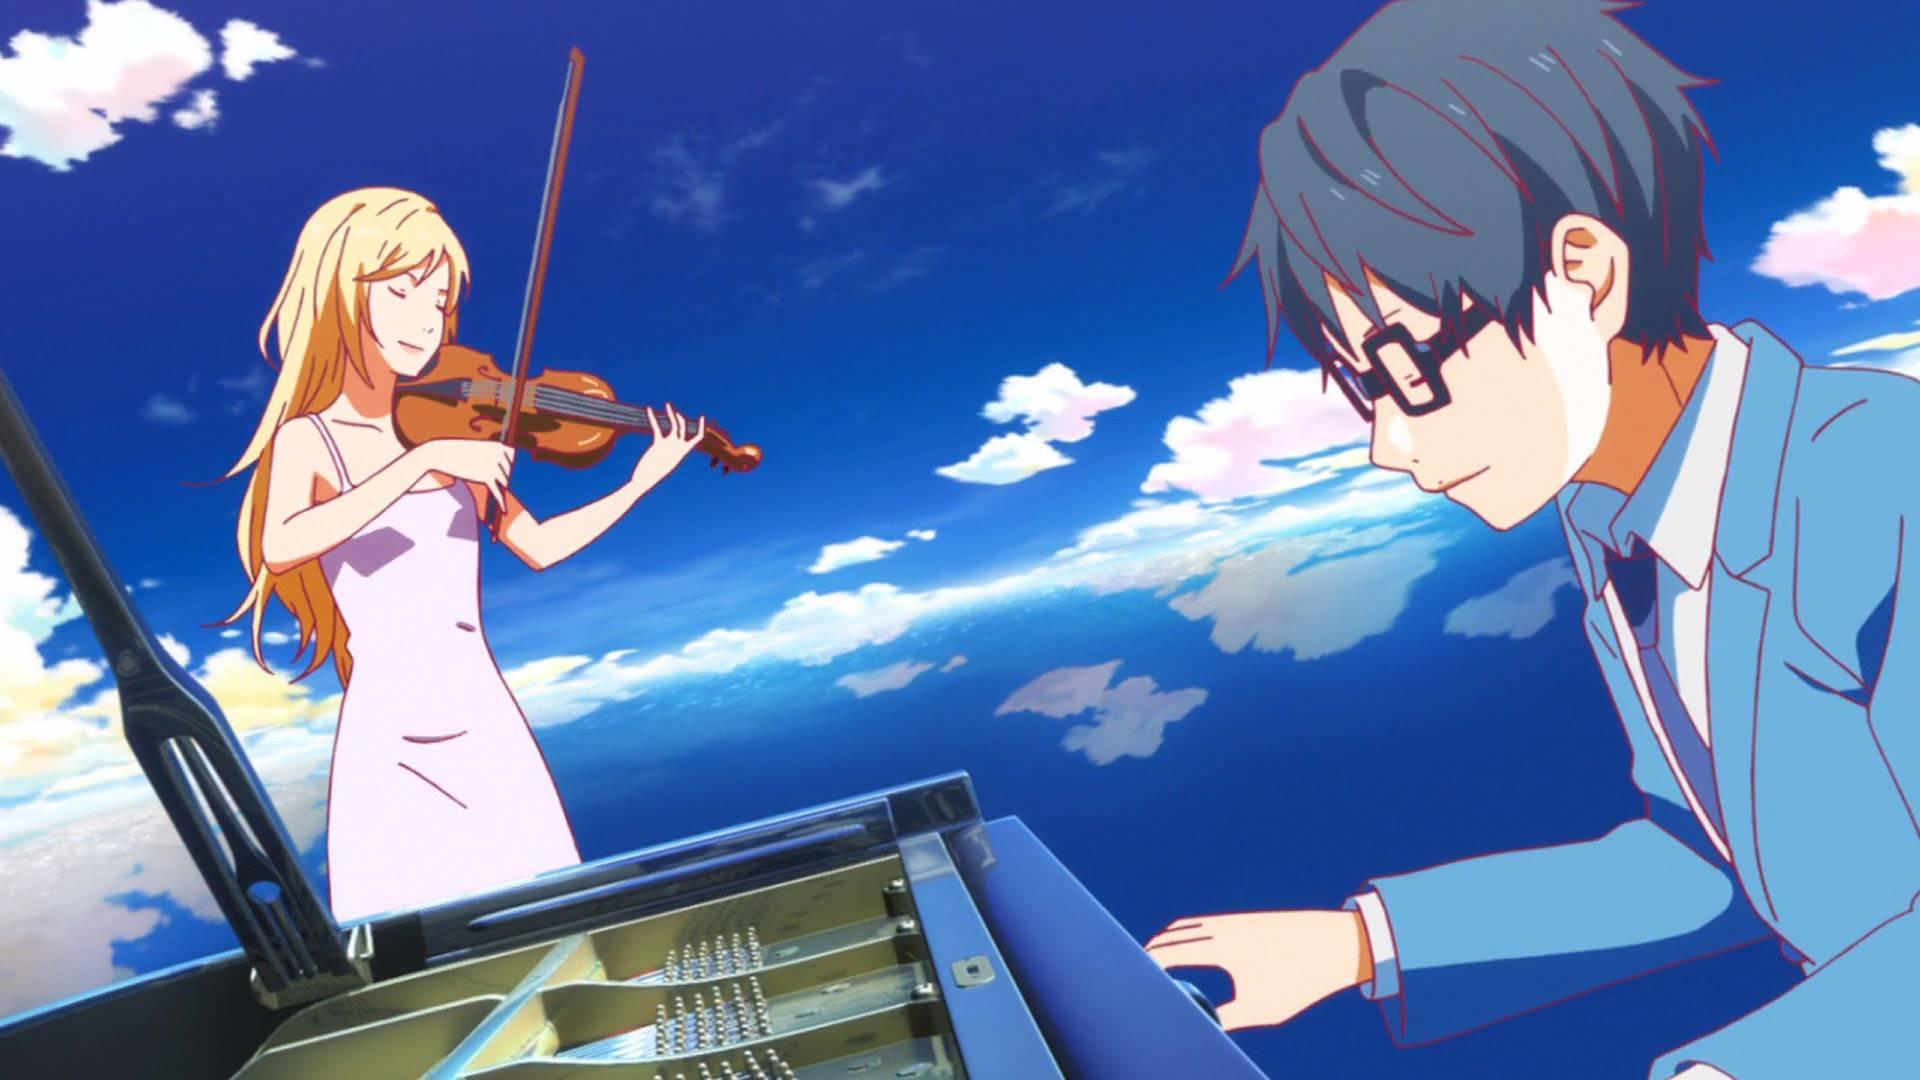 Your Lie in April Creator to Debut New Series Soon